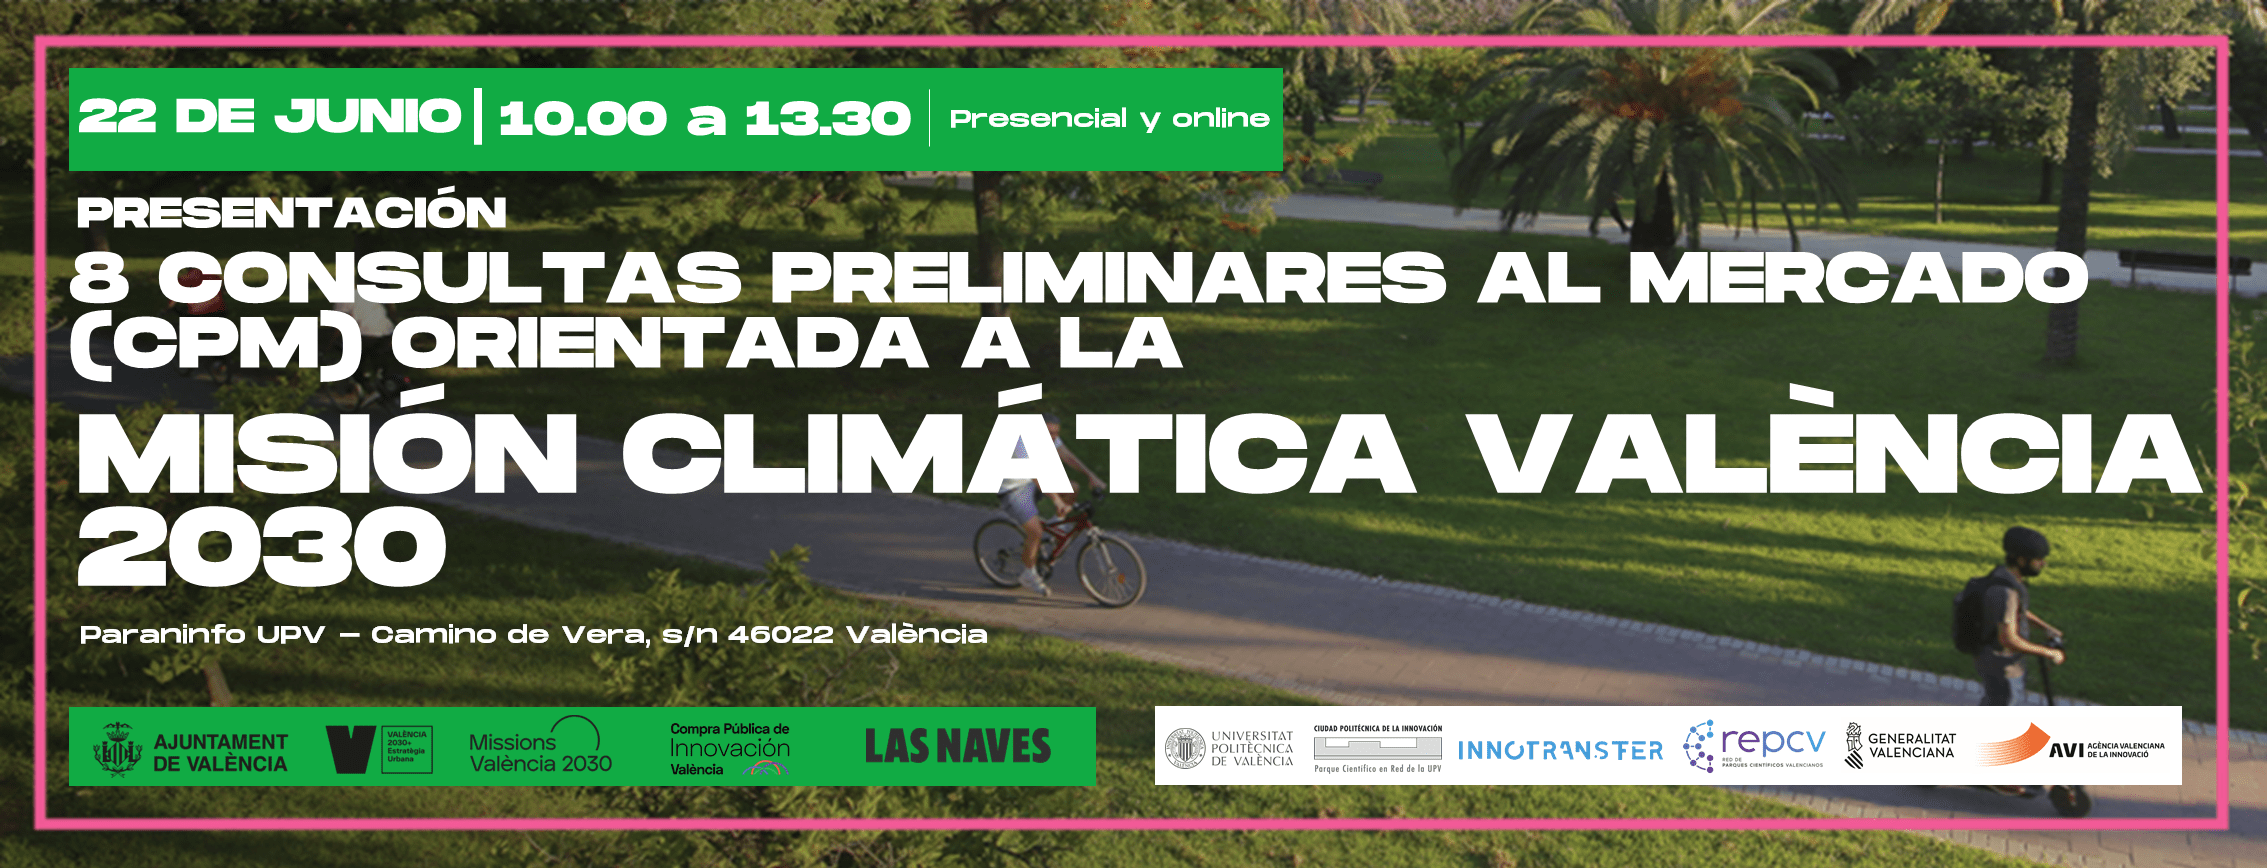 BANNER WEB SAVE THE DATE cpm valencia